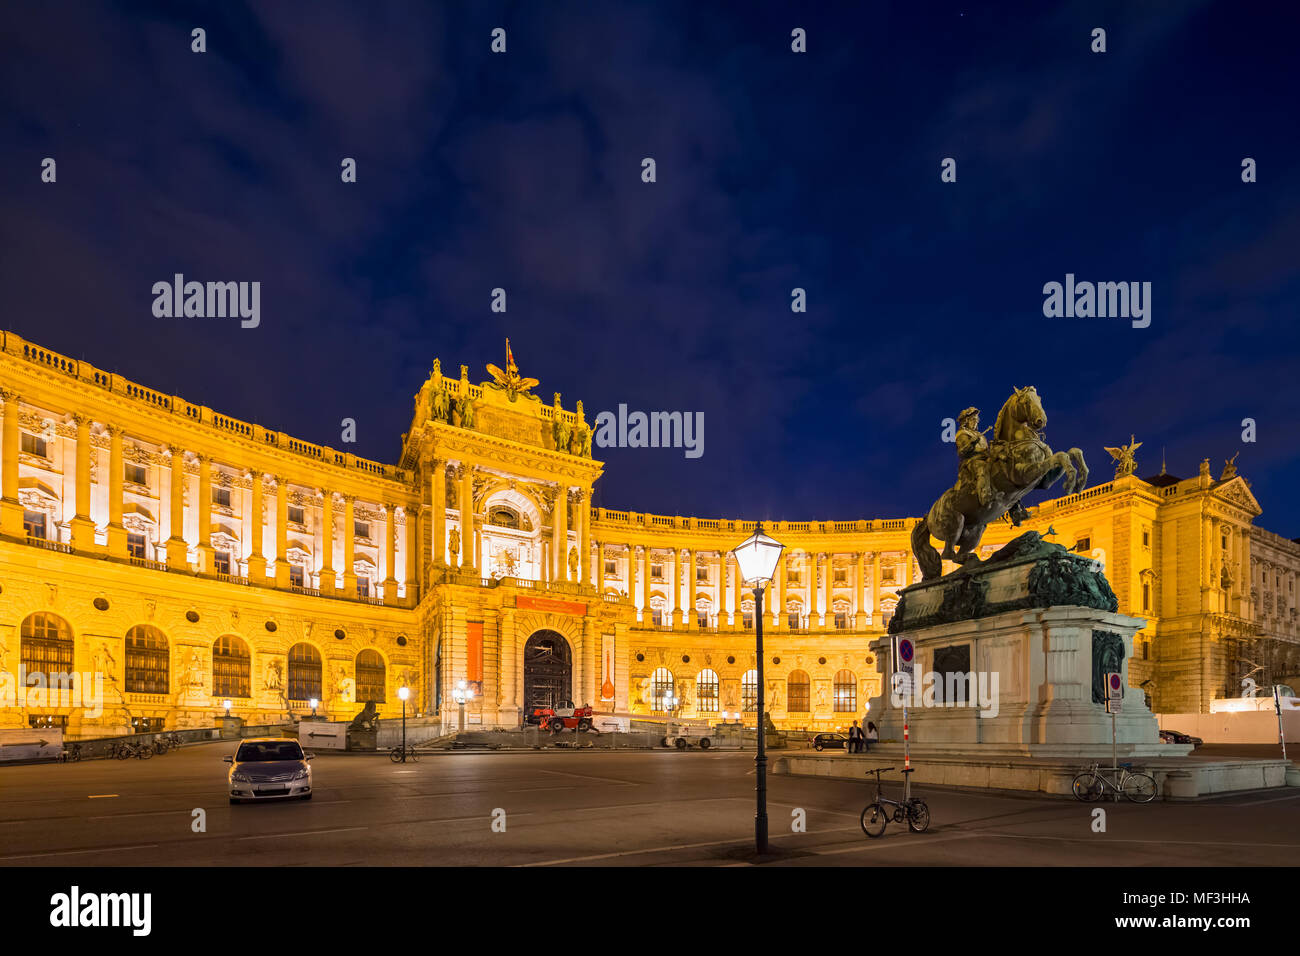 Austria, Vienna, Neue Hofburg part of Hofburg Palace with monument Prince Eugen in the foreground Stock Photo